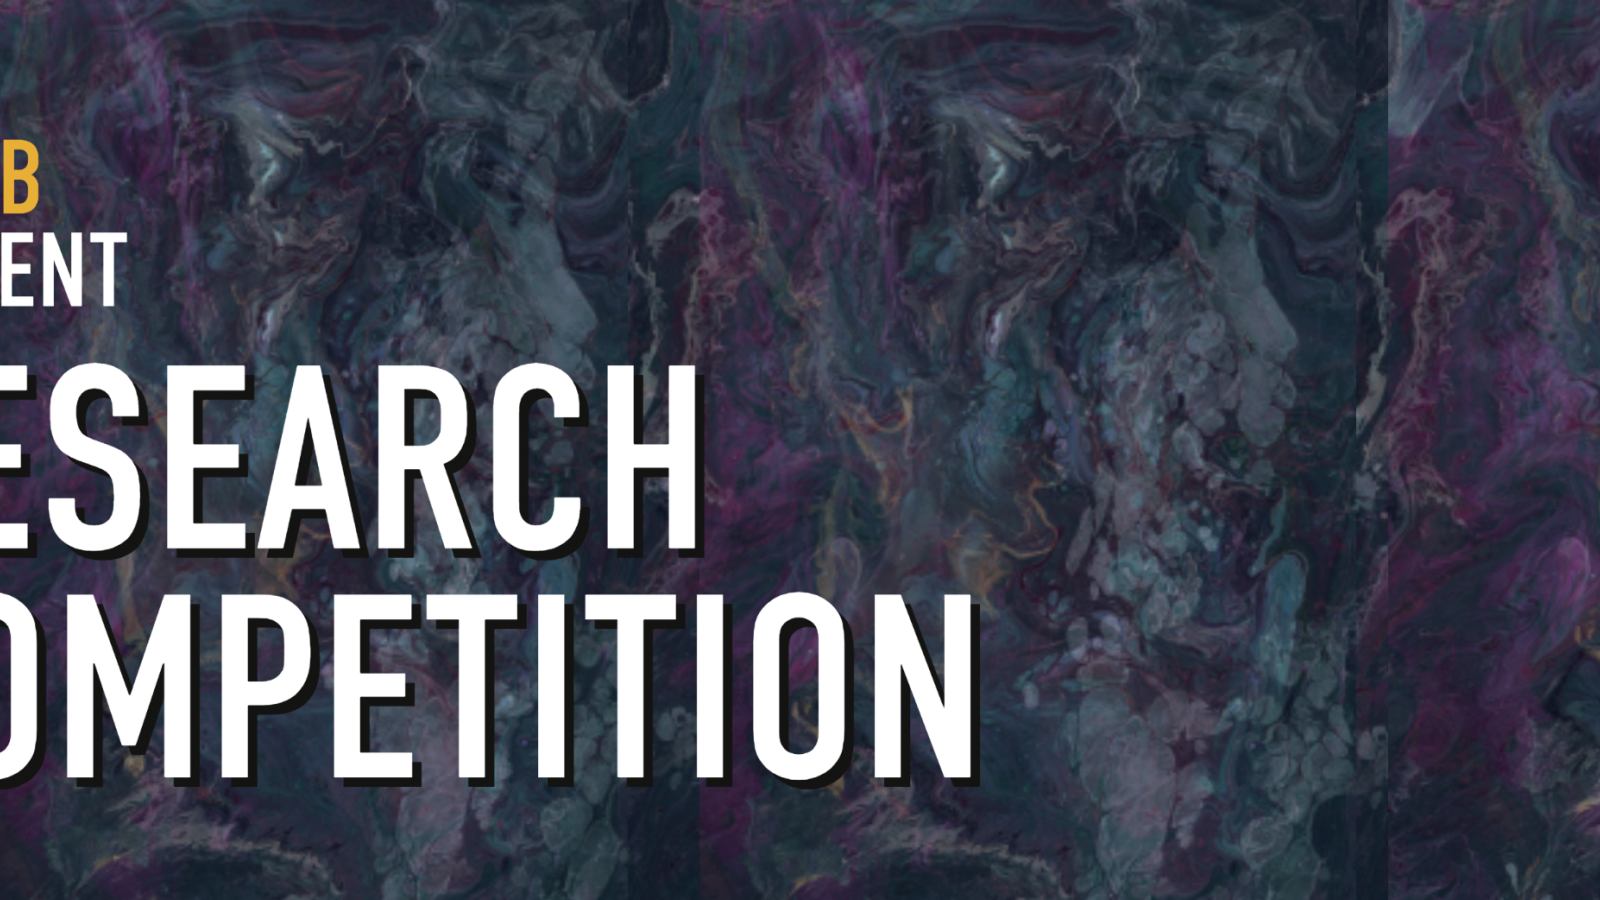 25th Annual CSULB Student Research Competition